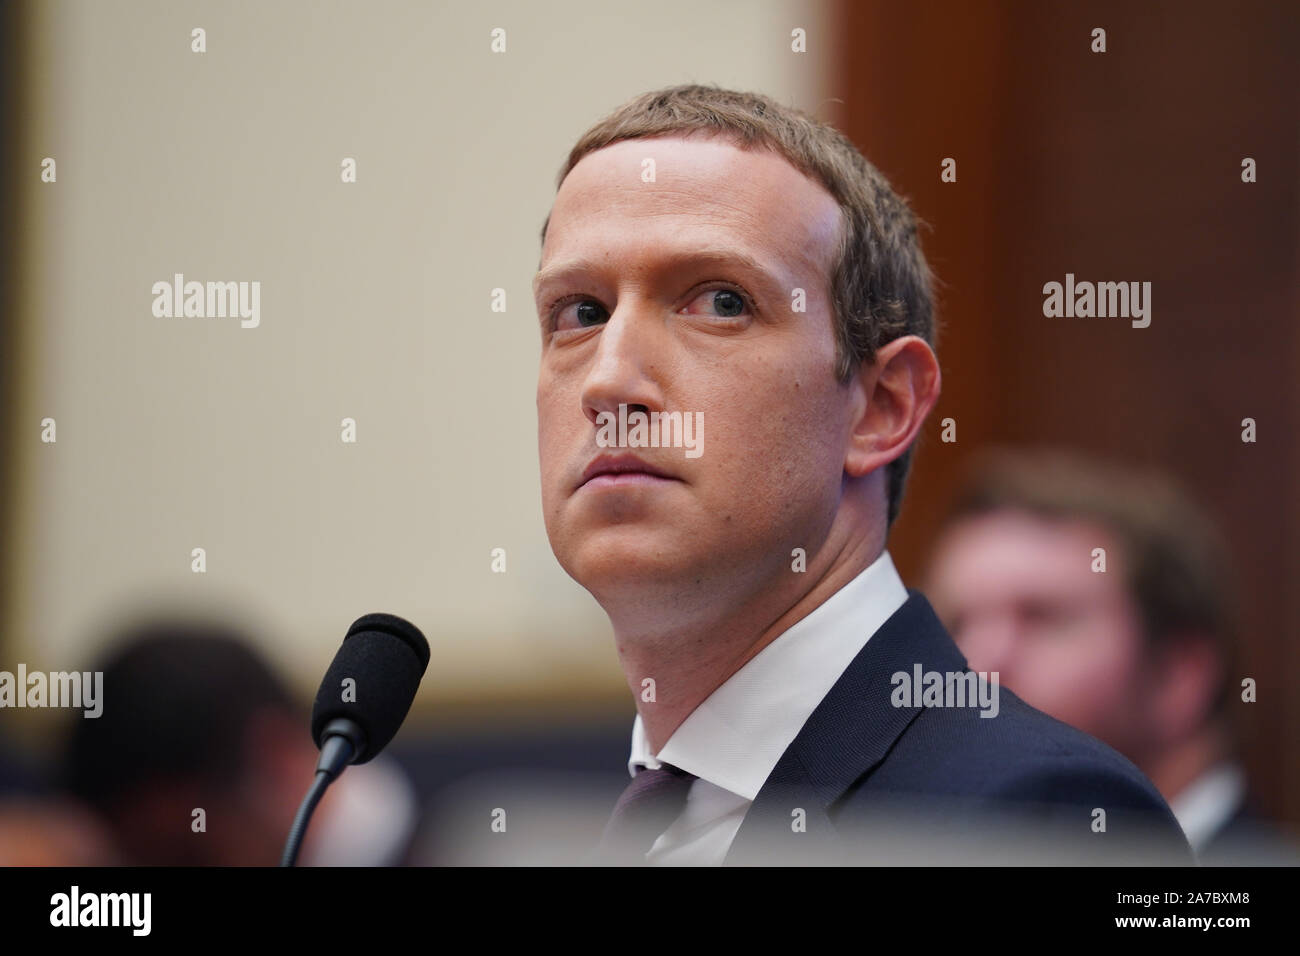 (191101) -- BEIJING, Nov. 1, 2019 (Xinhua) -- Facebook CEO Mark Zuckerberg testifies before the U.S. House Financial Services Committee during an Examination of Facebook and Its Impact on the Financial Services and Housing Sectors hearing on Capitol Hill in Washington D.C., the United States, on Oct. 23, 2019. (Xinhua/Liu Jie) Stock Photo